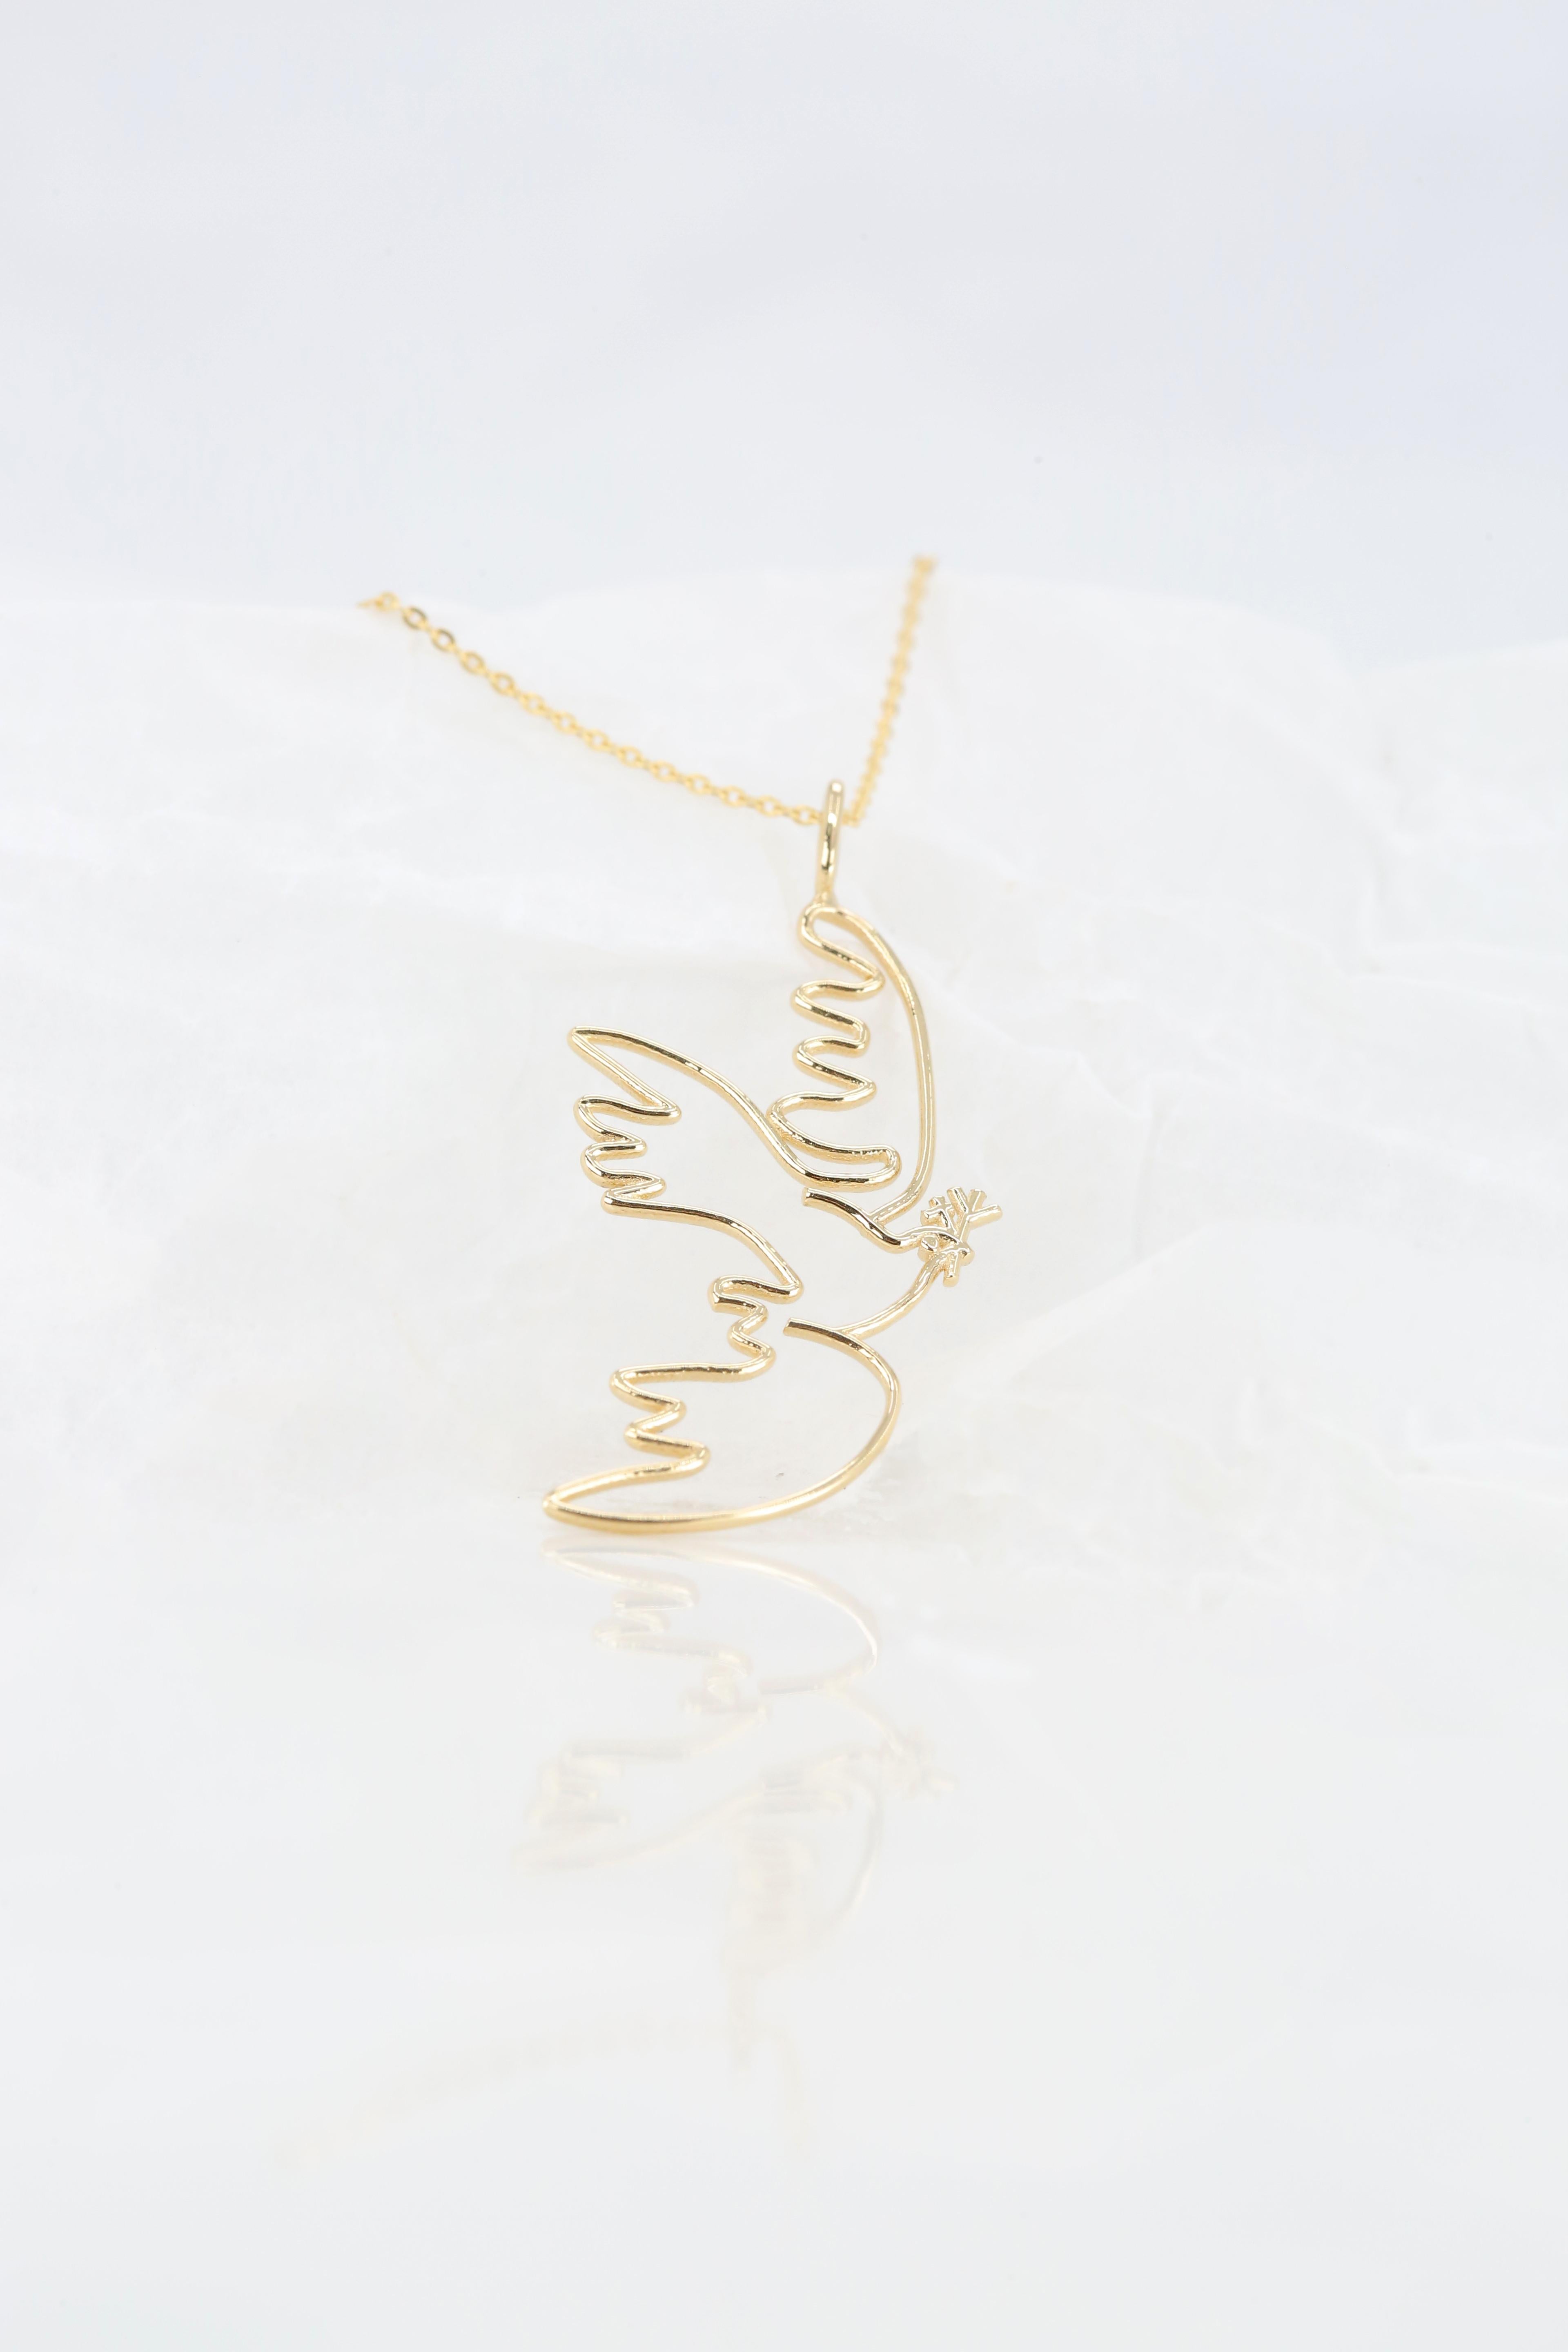 14K Gold Cubic Dove Necklace, Inspired by Picasso's 